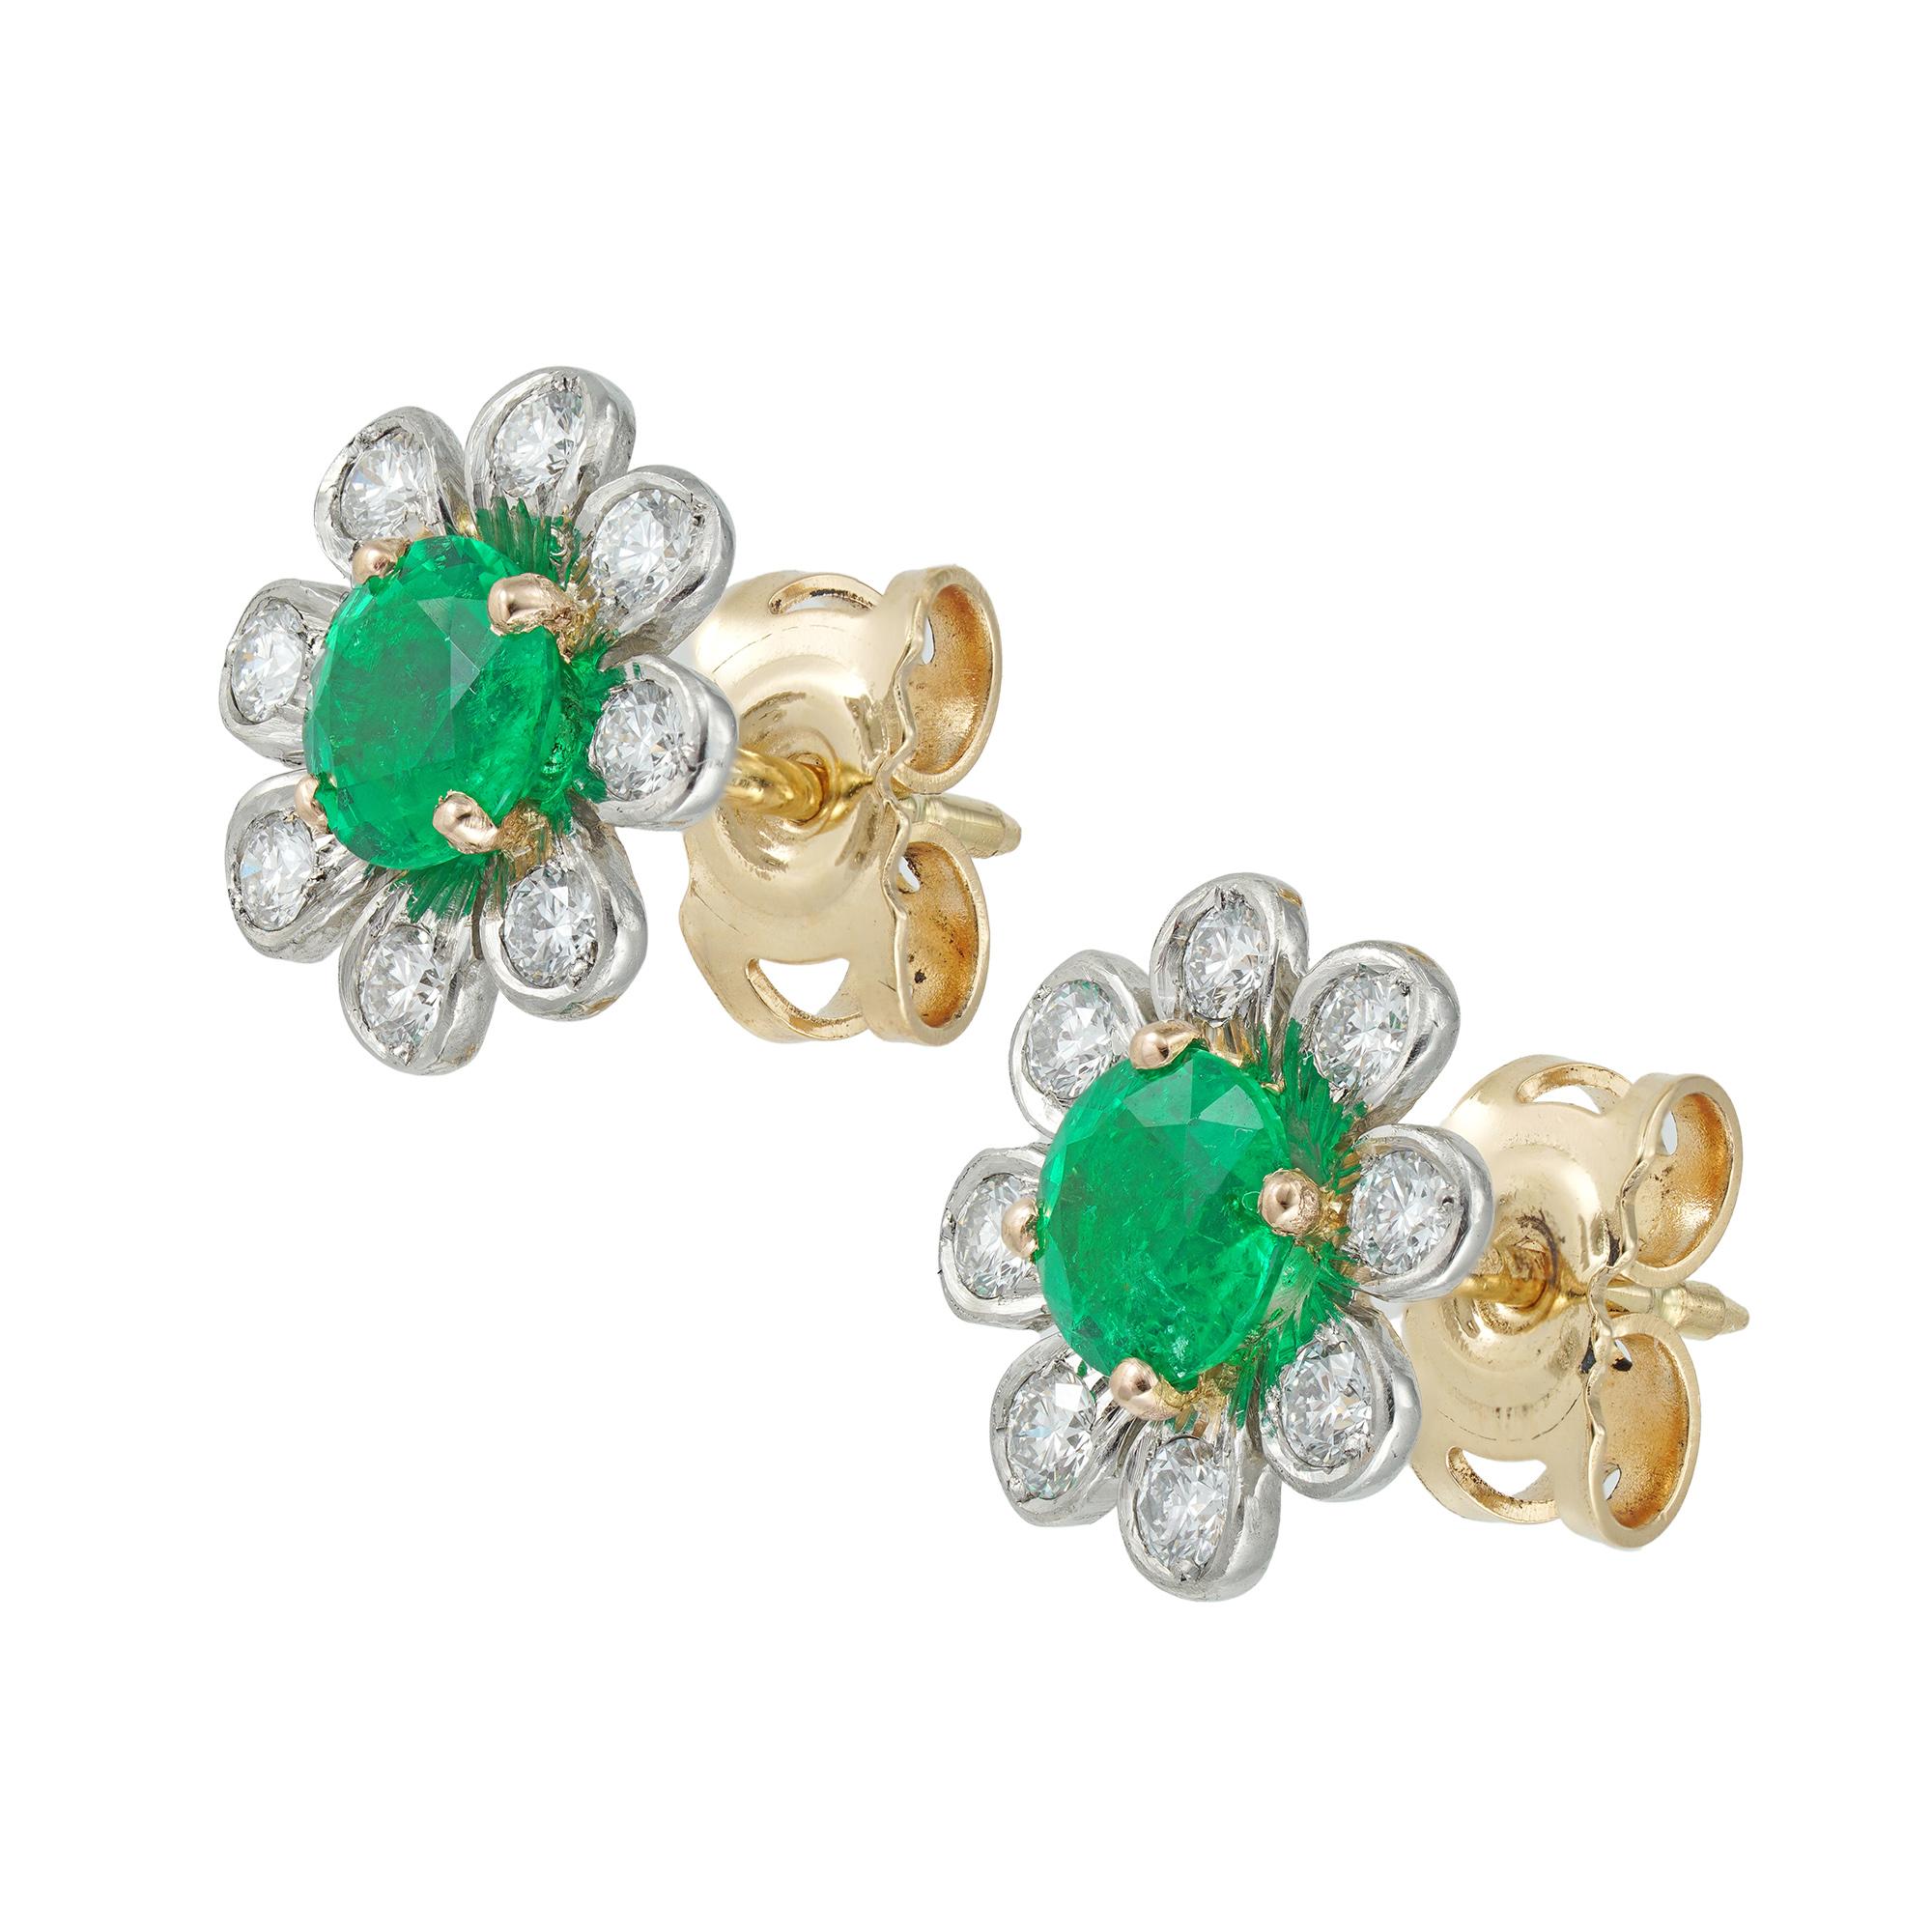 A pair of emerald and diamond cluster earrings, each earring if the form of a flower-head, centrally set with a round faceted emerald four claw-set in yellow gold, surrounded by eight platinum petals, each petal set with a round brilliant-cut